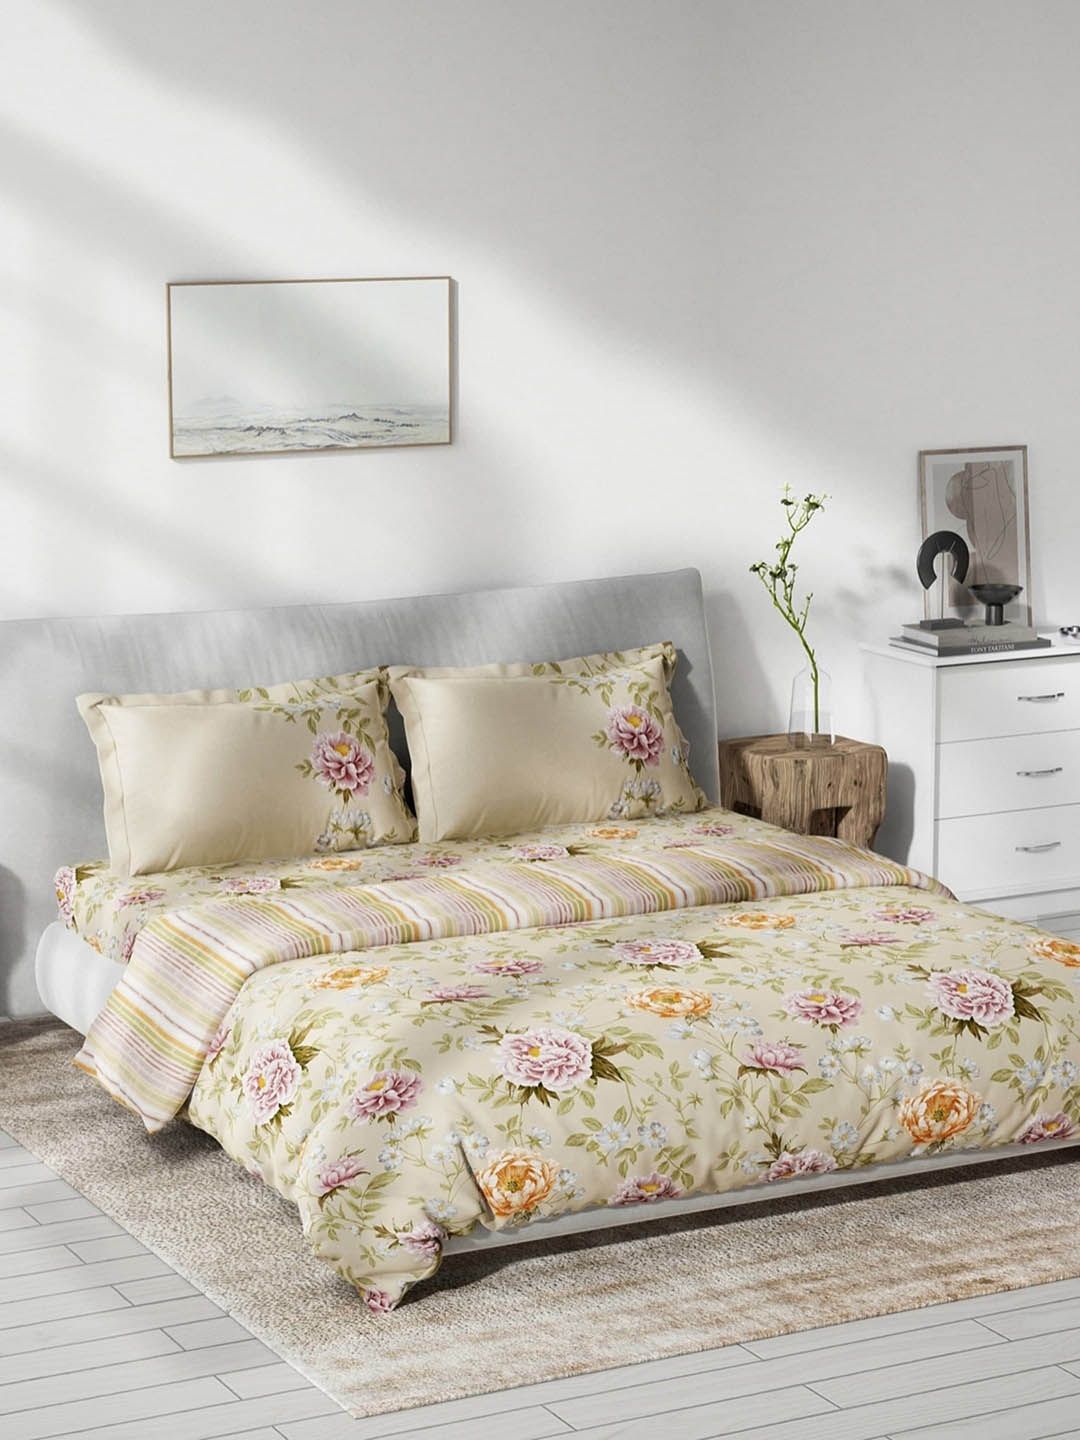 DDecor Peach Floral Printed Double Queen Cotton Bedding Set Price in India